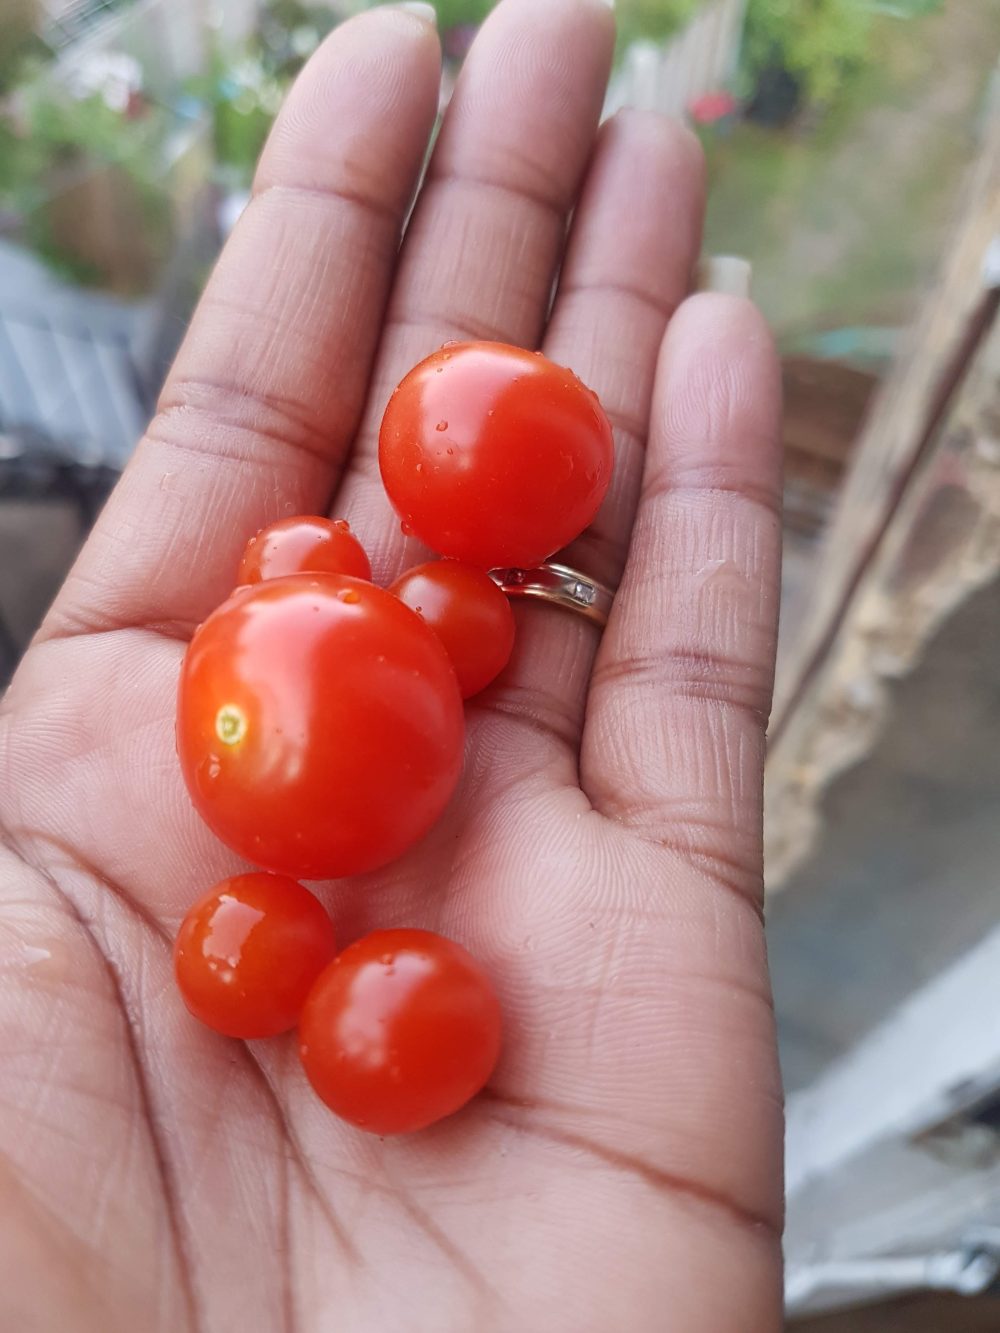 Tomatoes in hand